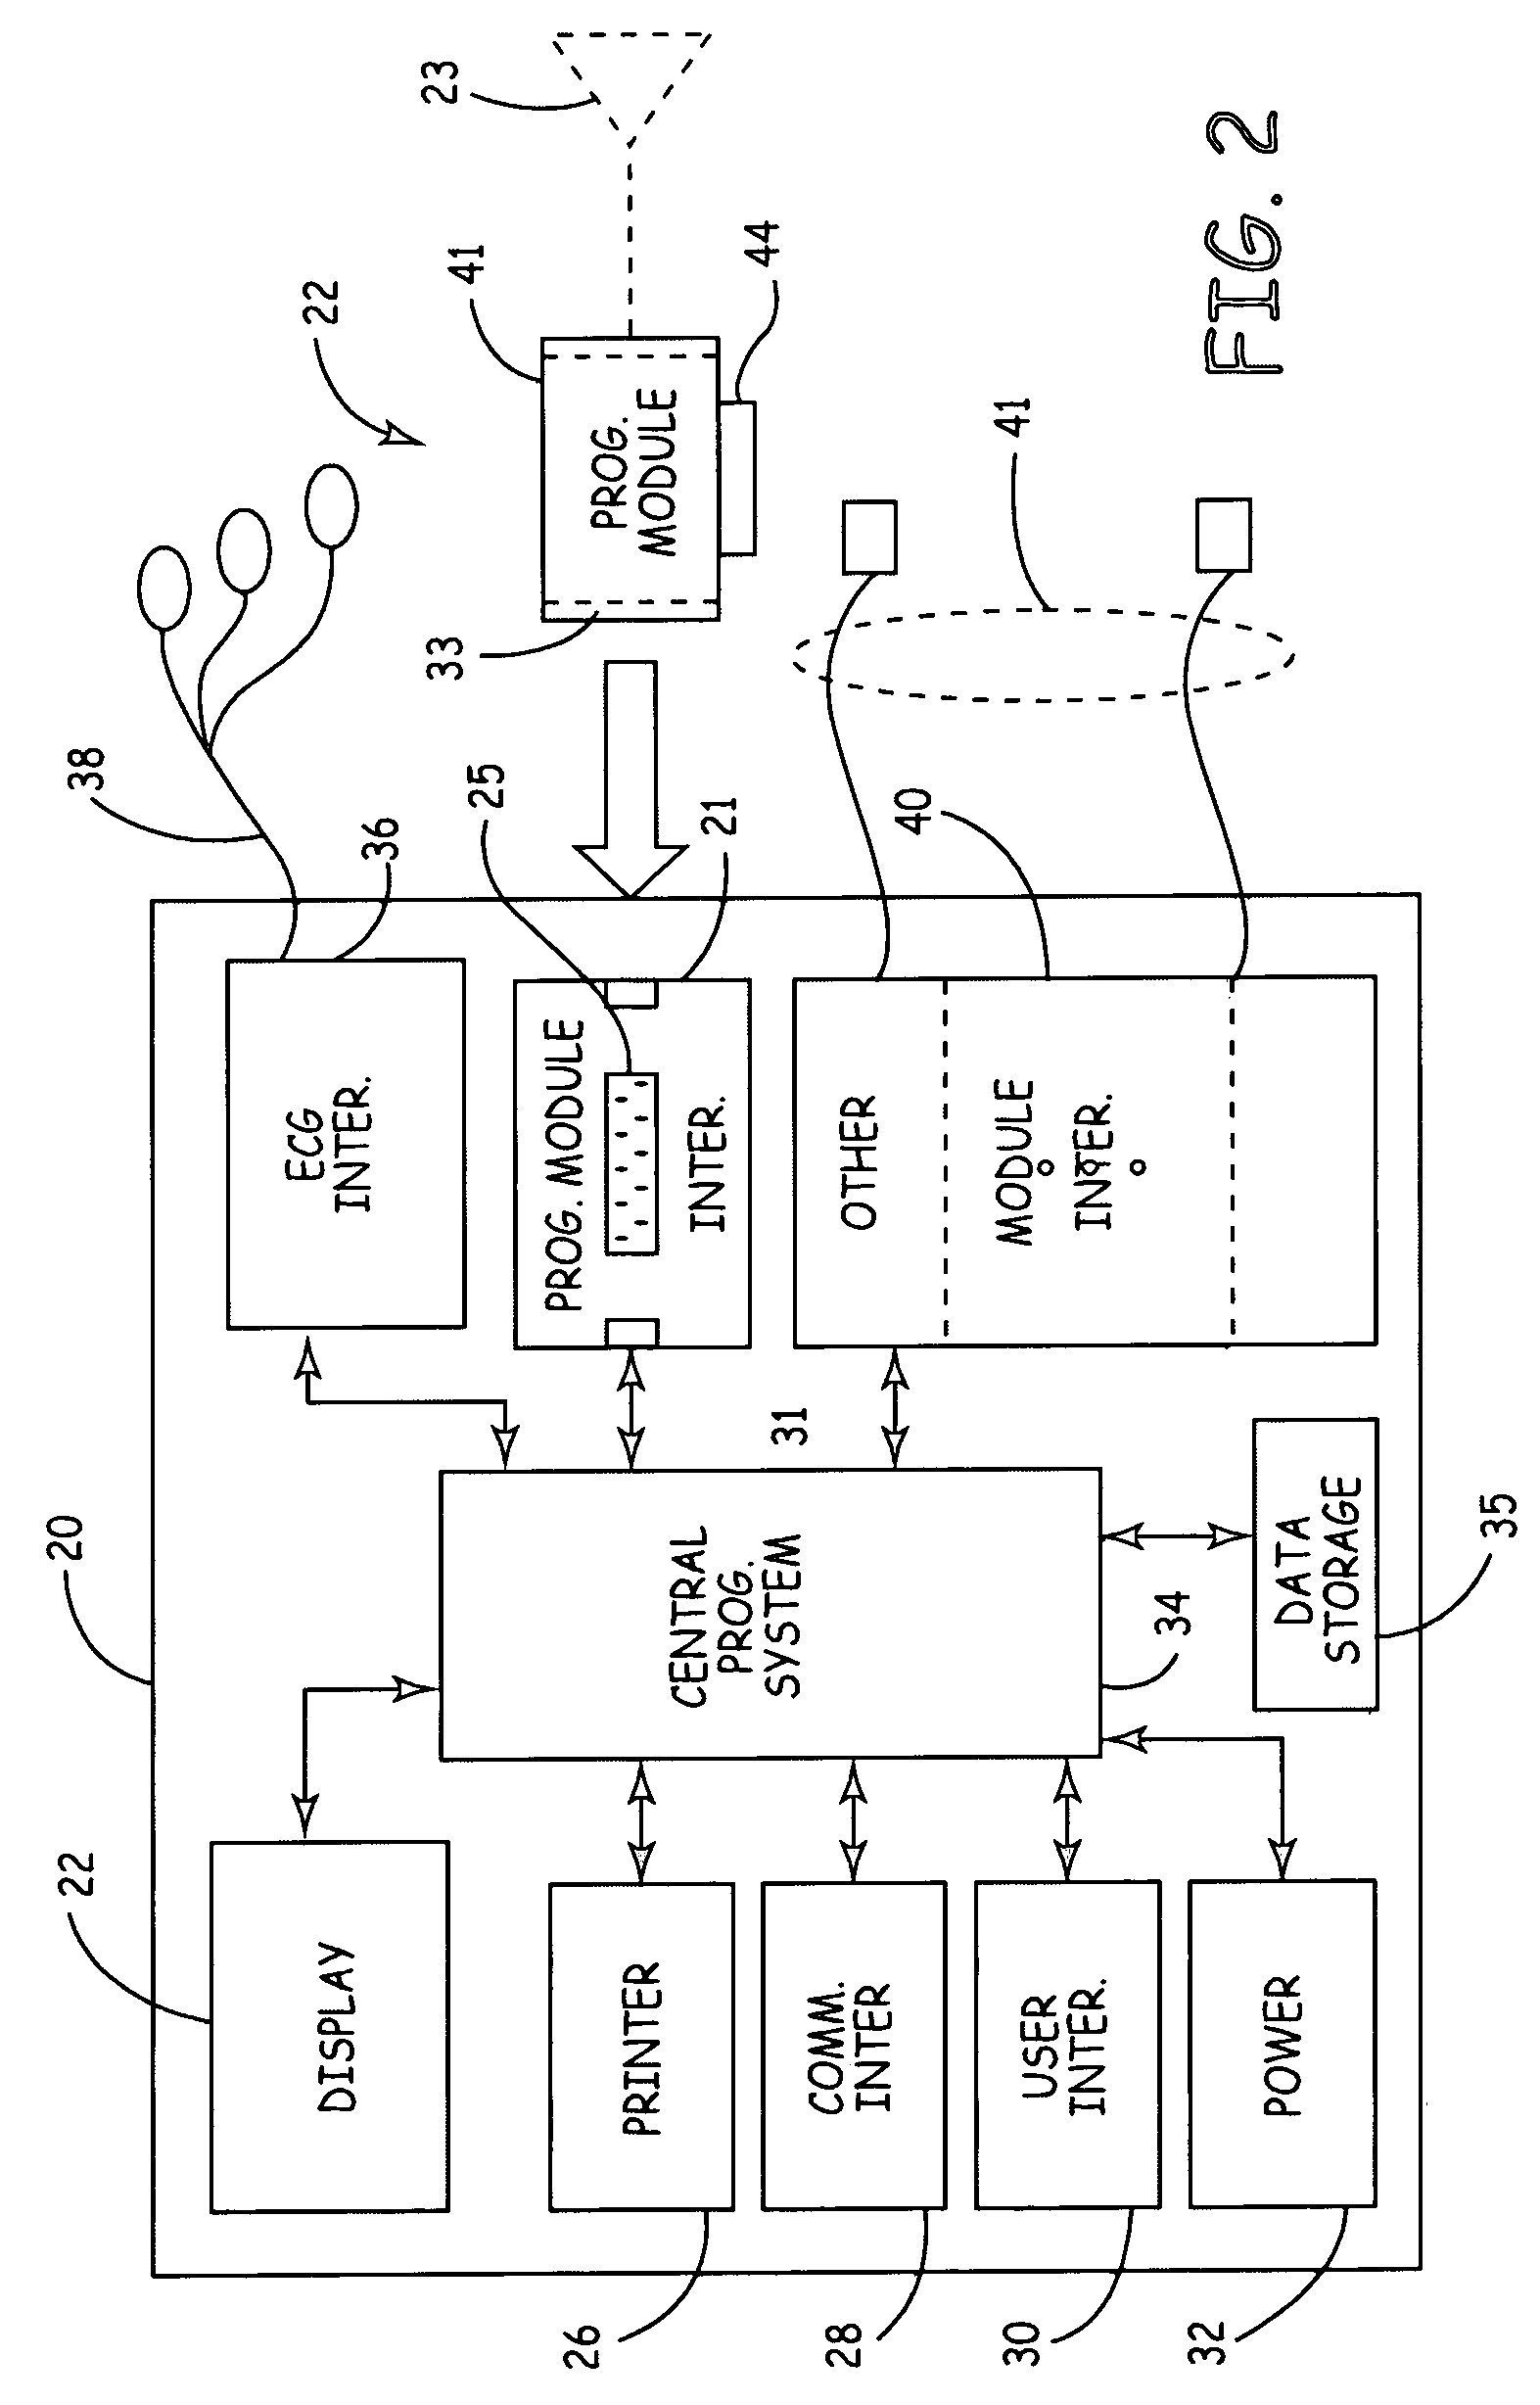 Implantable medical device programmer module for use with existing clinical instrumentation